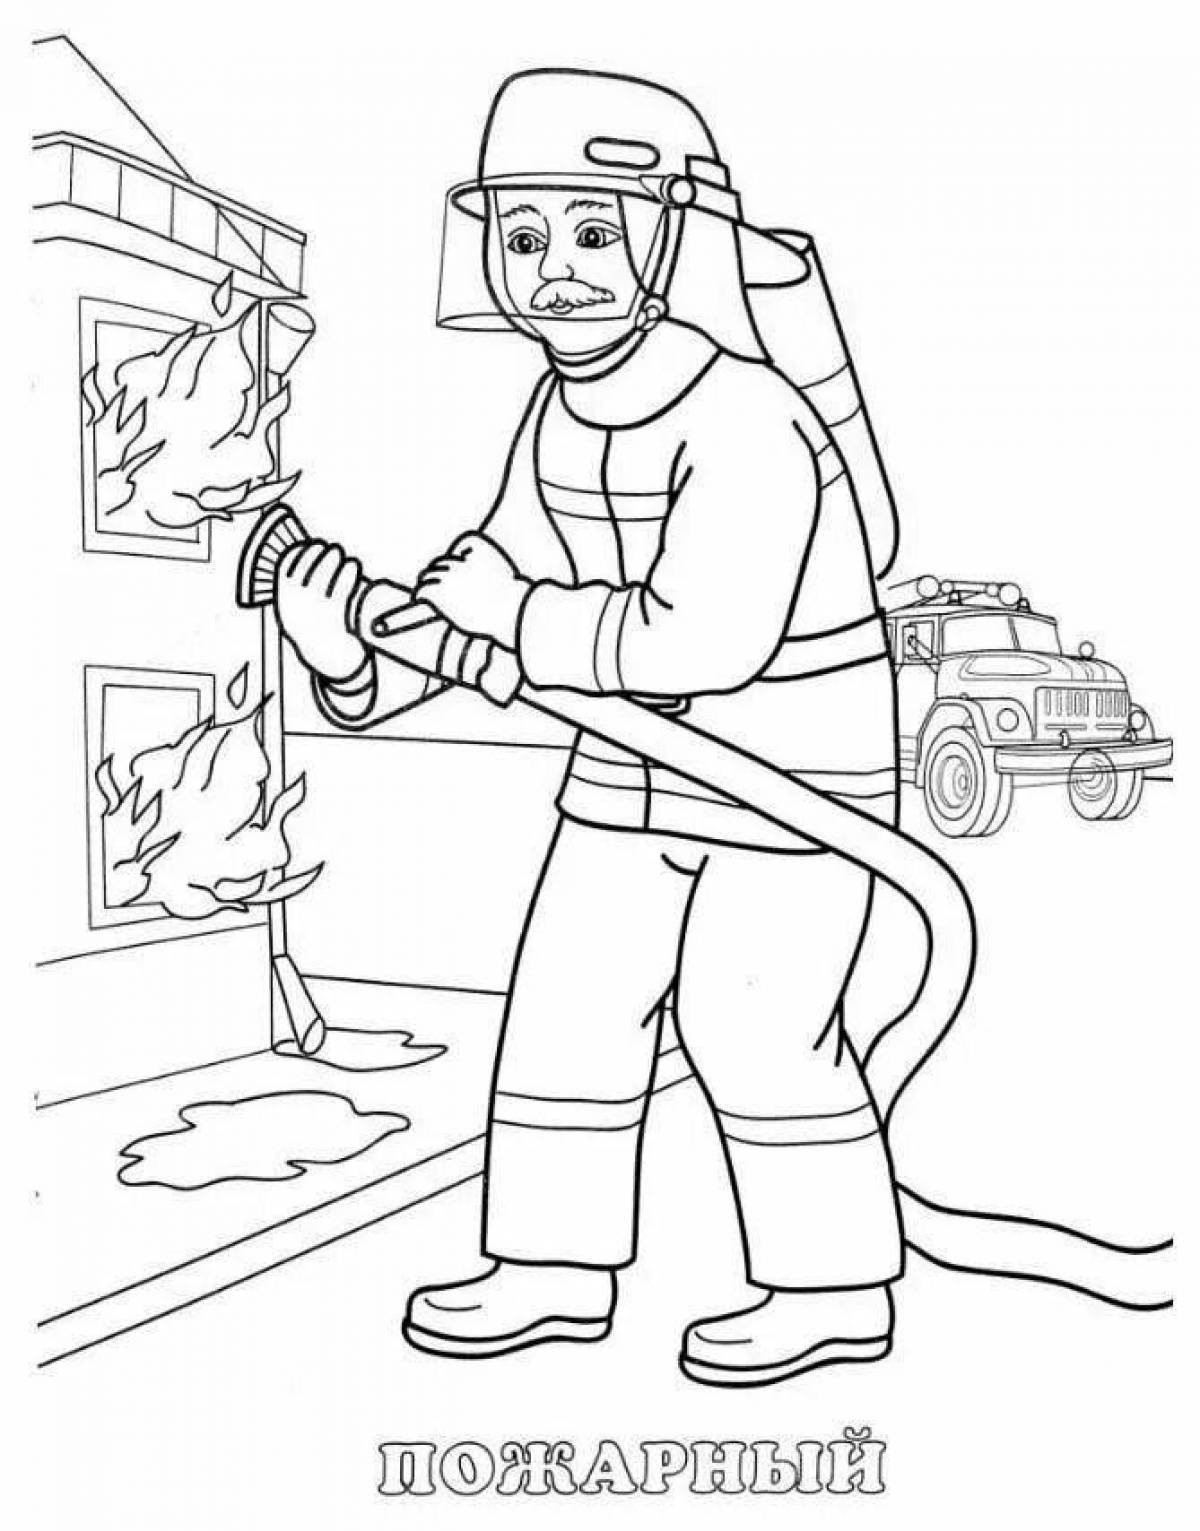 Creative fire safety coloring book for preschoolers